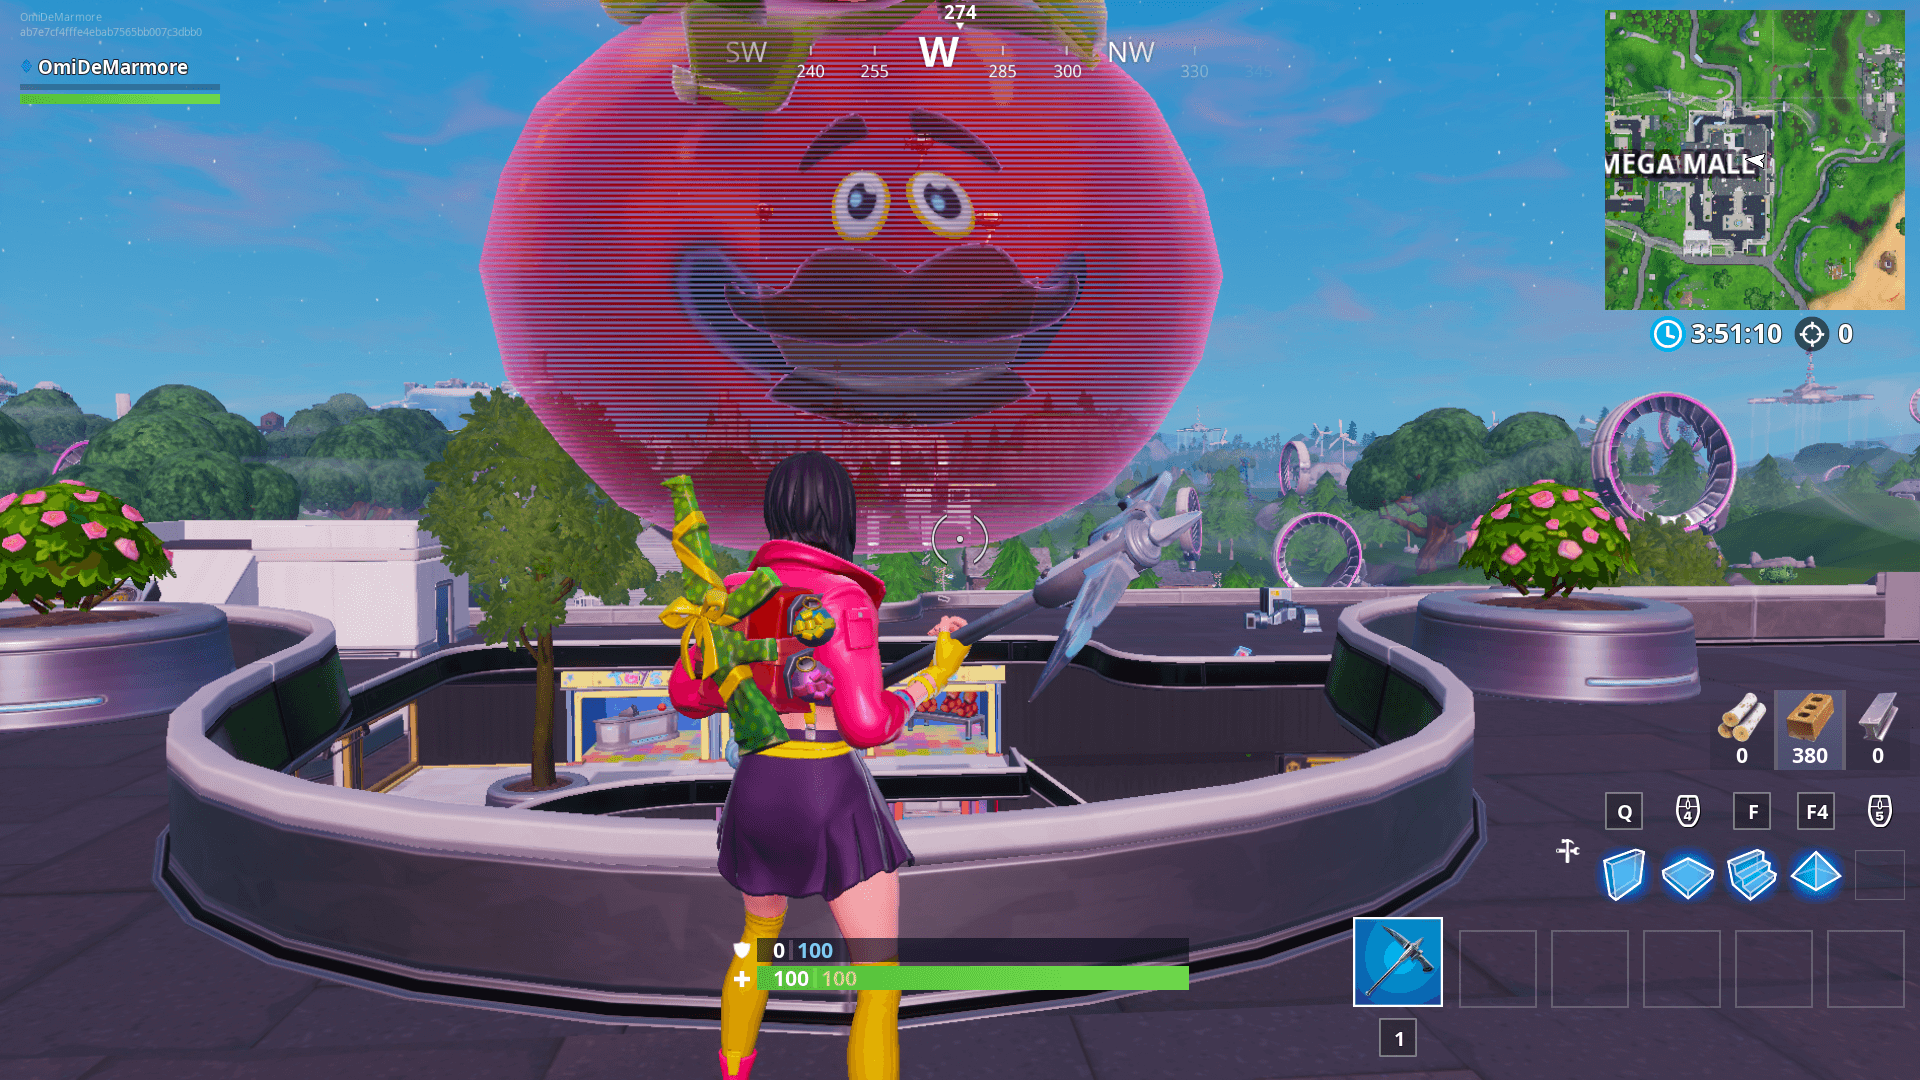 Where Is The Giant Holographic Tomato Head In Fortnite Fortnite Holographic Tomato Durrr Burger Head And Dumpling Head Location Dot Esports